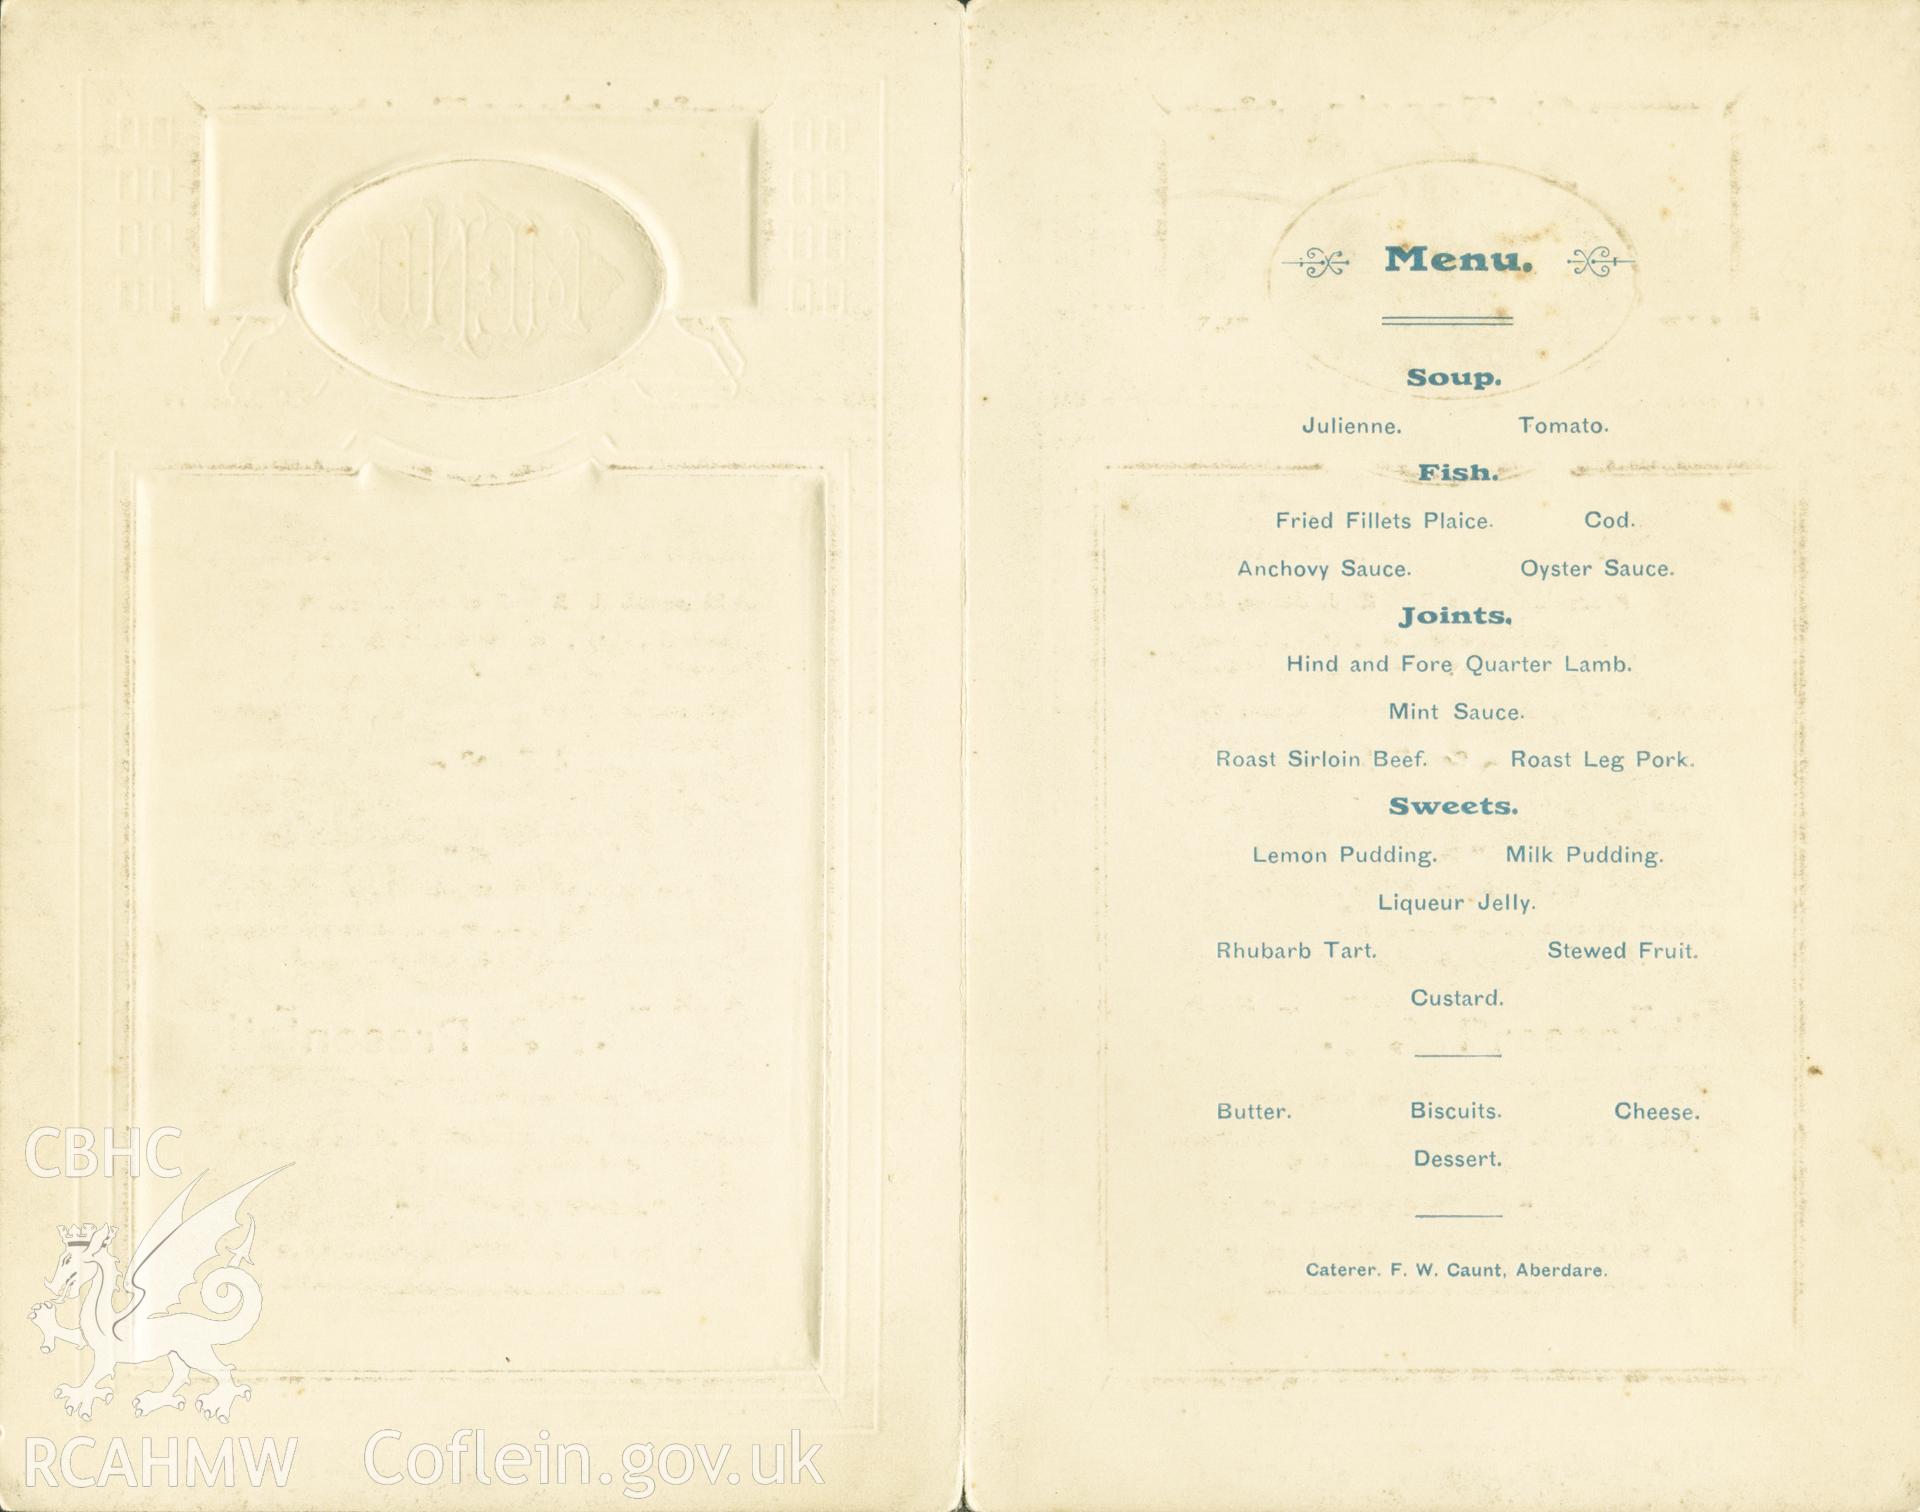 Copy of menu for the Ysgol Jones Re-Union Banquet & Presentation at Memorial Hall, Aberdare on Thursday 6th April 1911. Donated to the RCAHMW during the Digital Dissent Project.